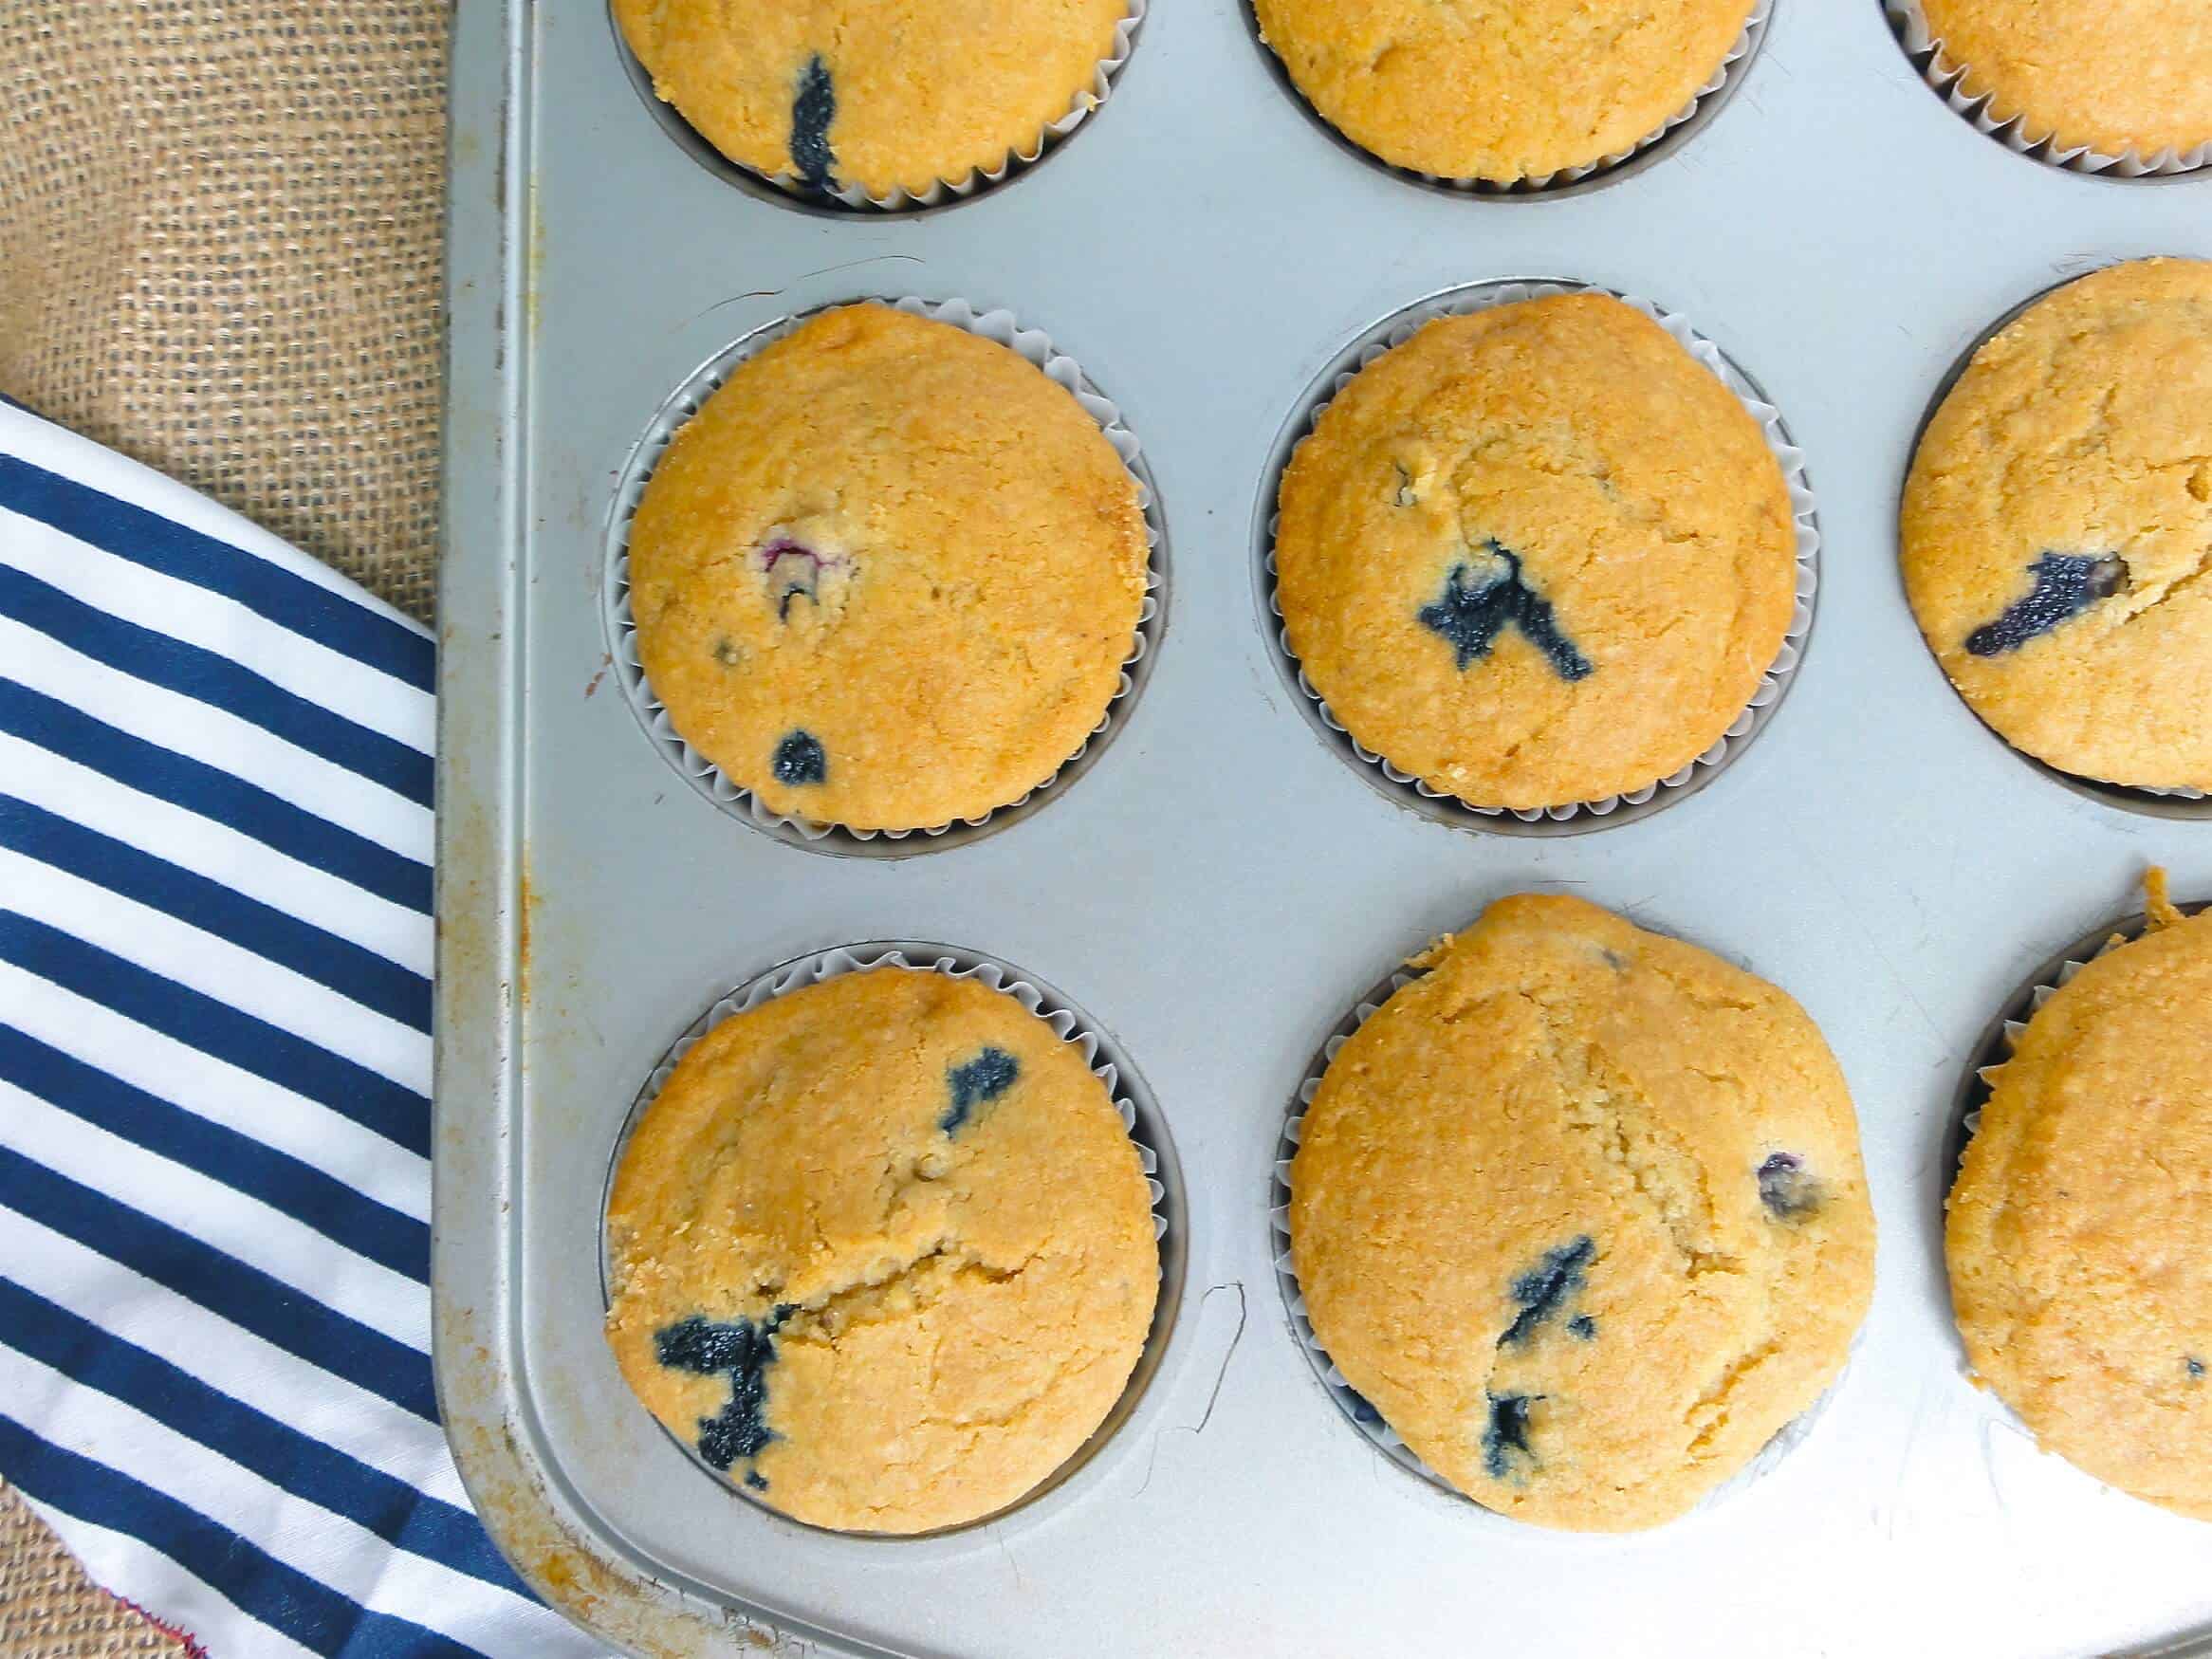 My Whole Wheat Blueberry Muffins are a healthier version of this breakfast favorite. But don't worry, they are perfectly moist and soft, due to using whole wheat pastry flour, honey and buttermilk. #MakeHealthyEasy via @JBraddockRD http://jennabraddock.com